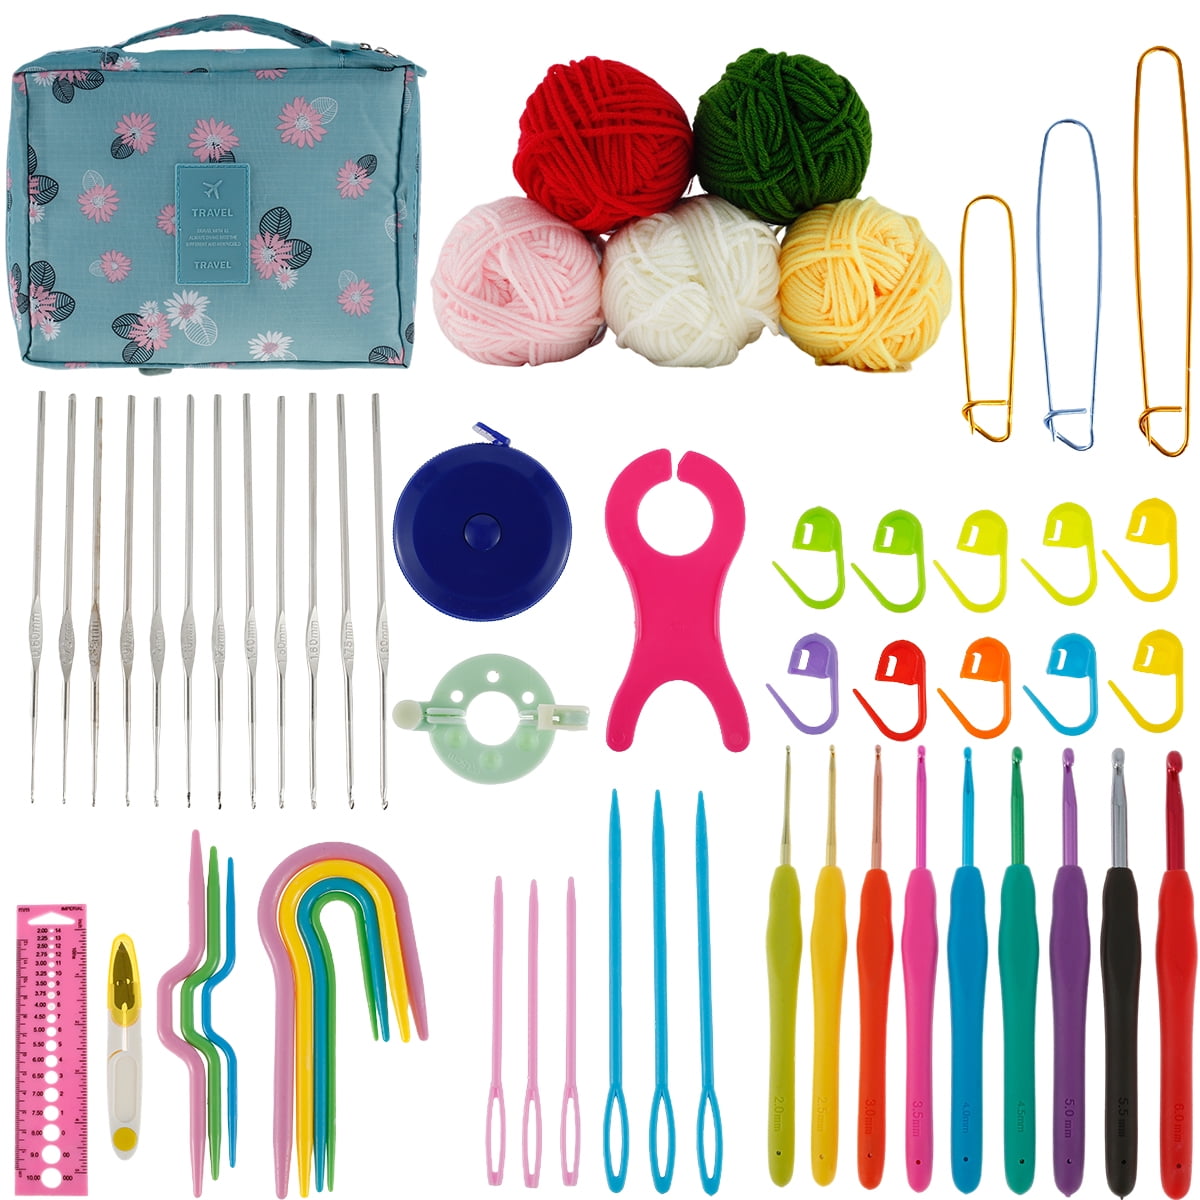 Craftbud Crochet Counter, Crochet Hook Set with Crochet Needles and Accessories, 23pc, Red